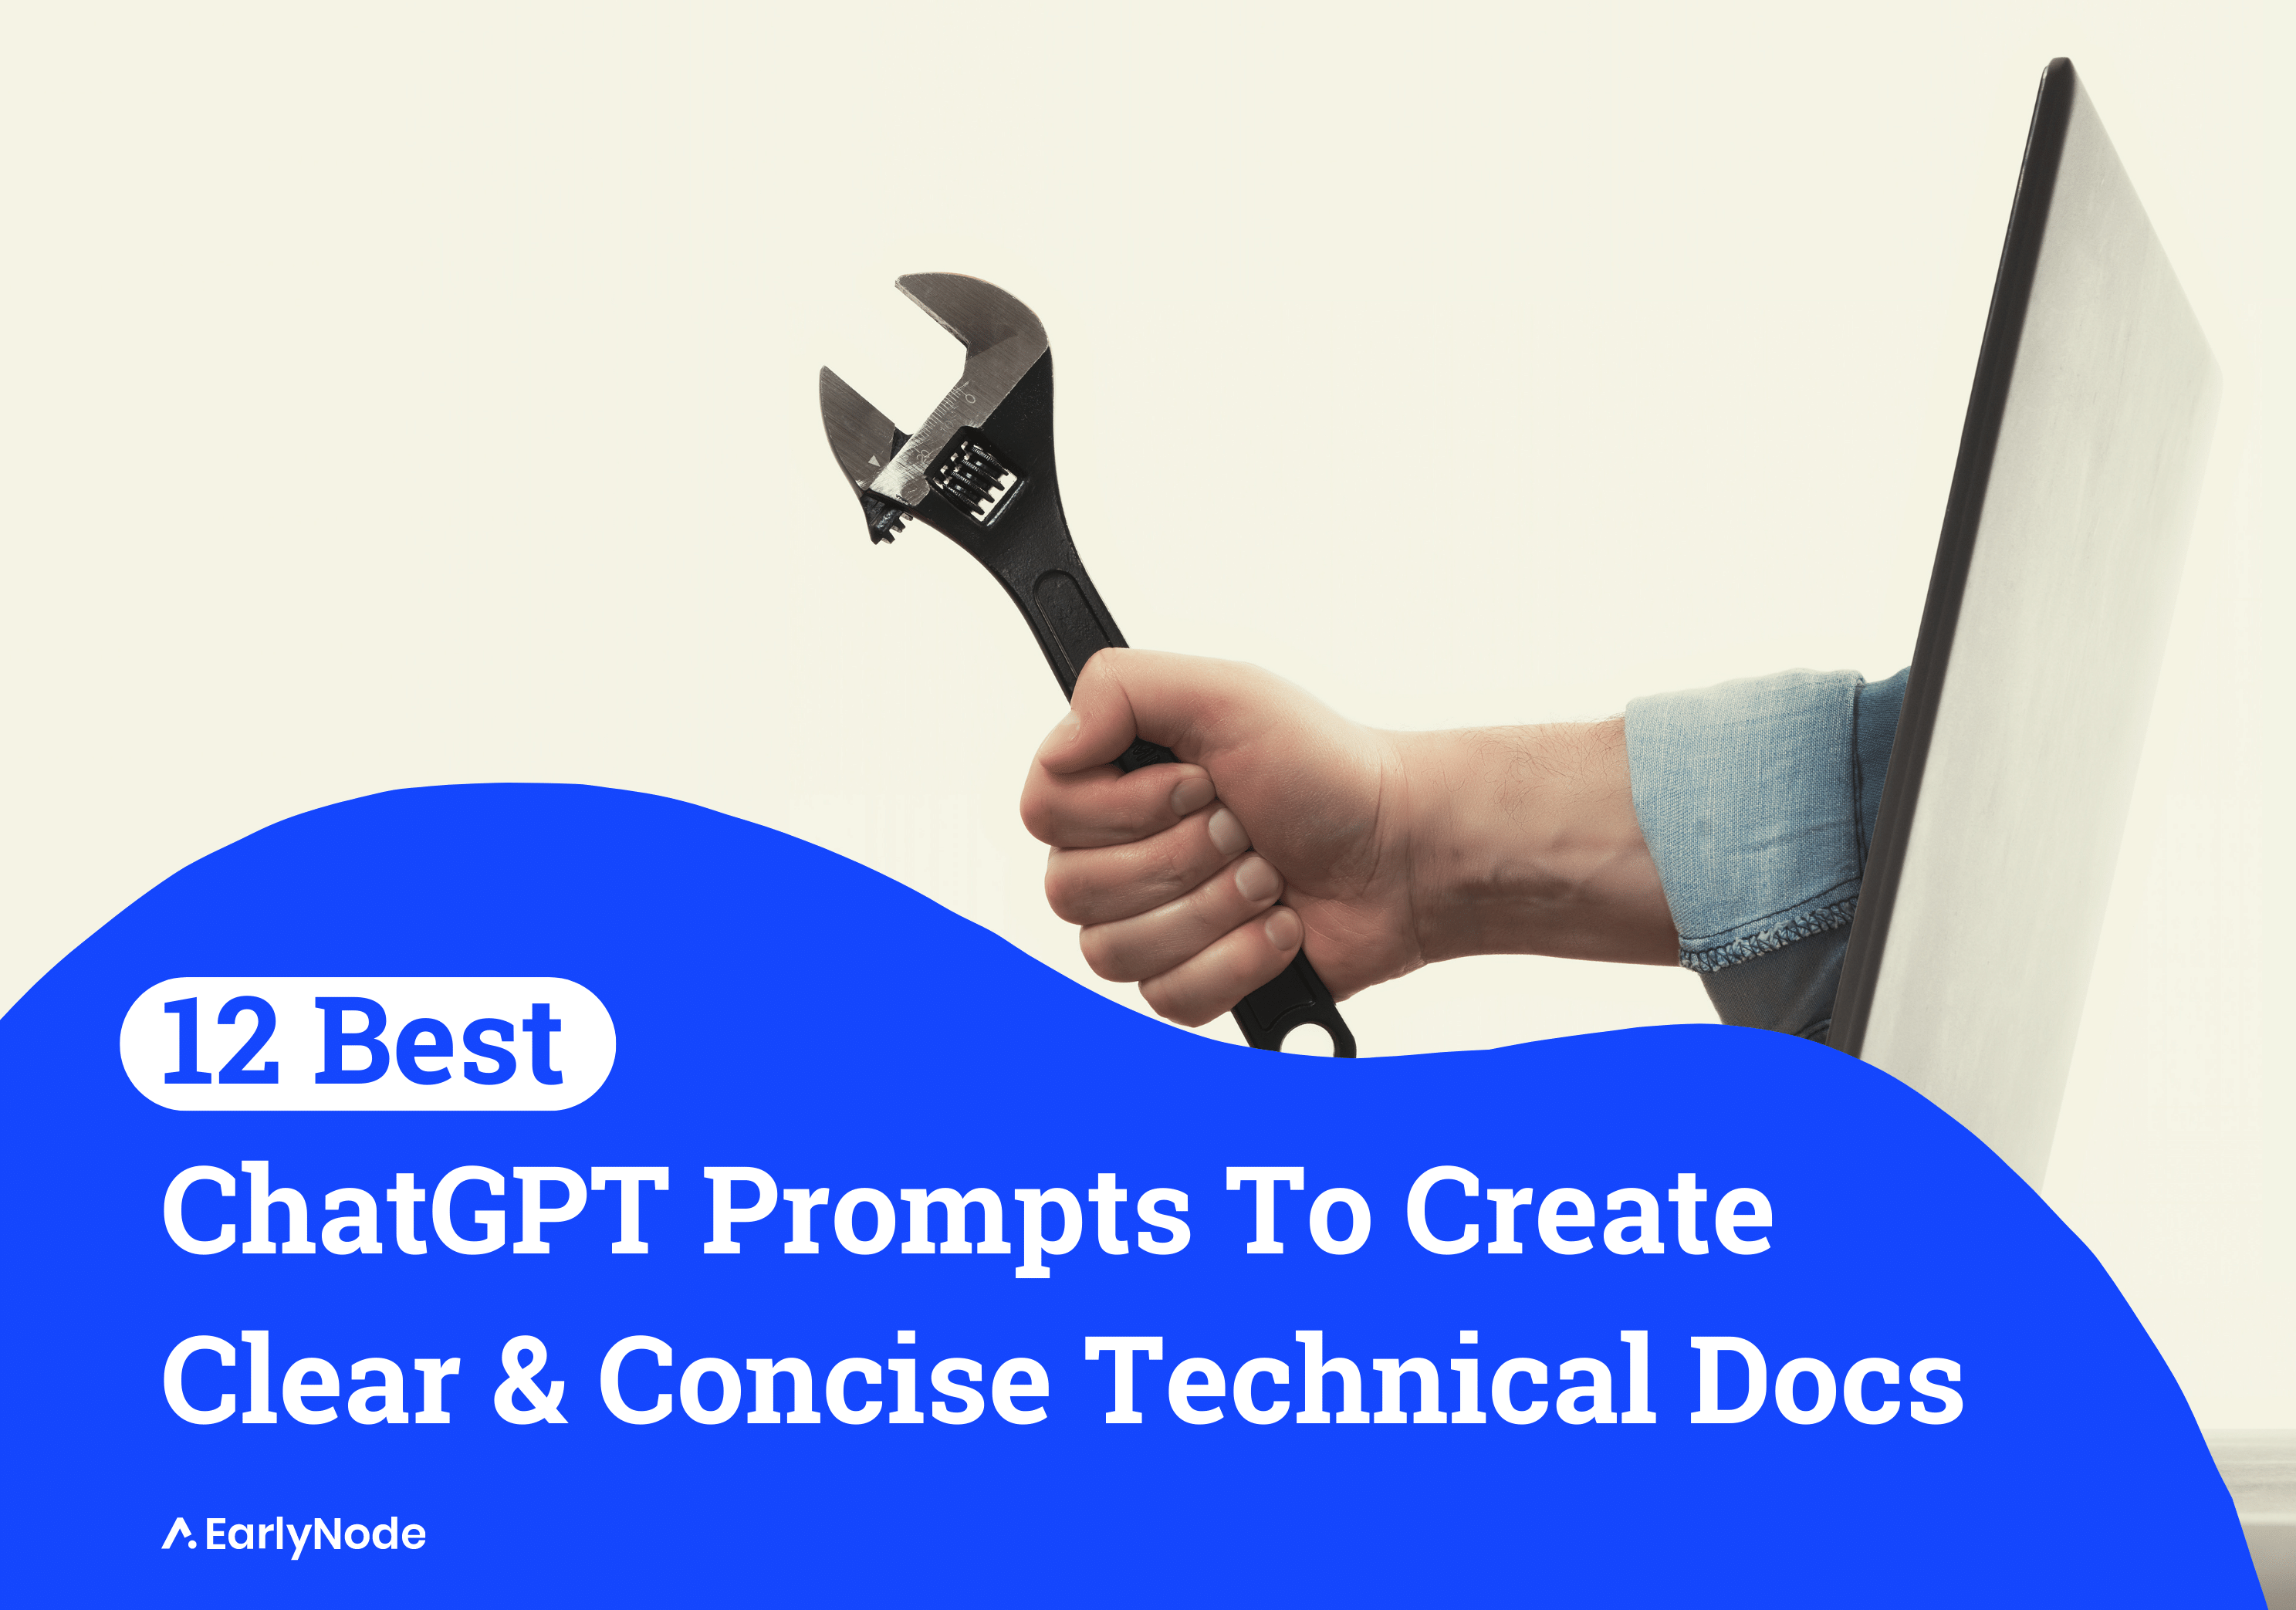 12 ChatGPT Prompts To Write Clear And Concise Technical Documents